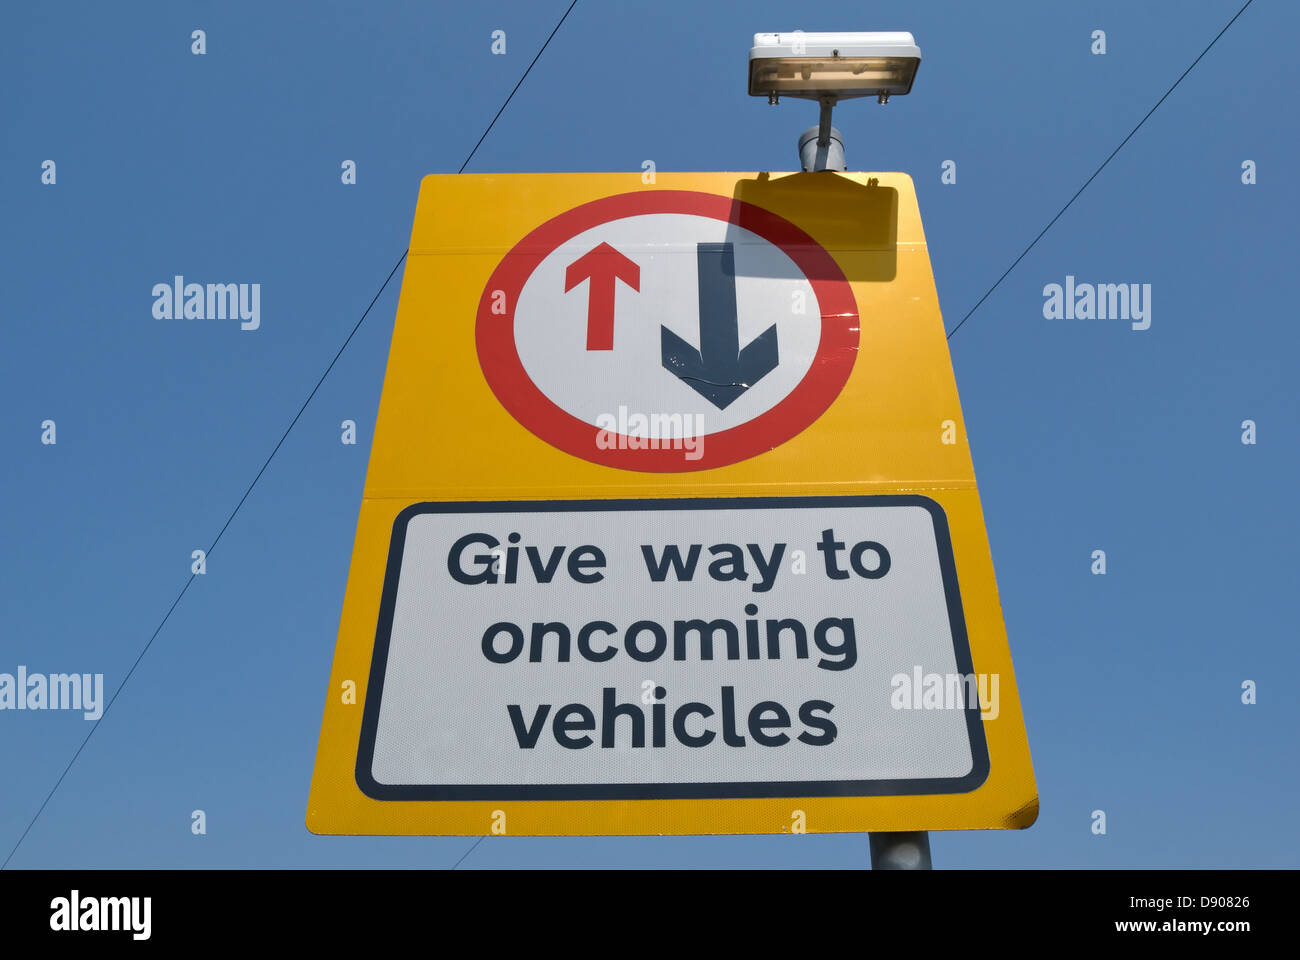 british road sign instructing drivers to give way to oncoming vehicles Stock Photo